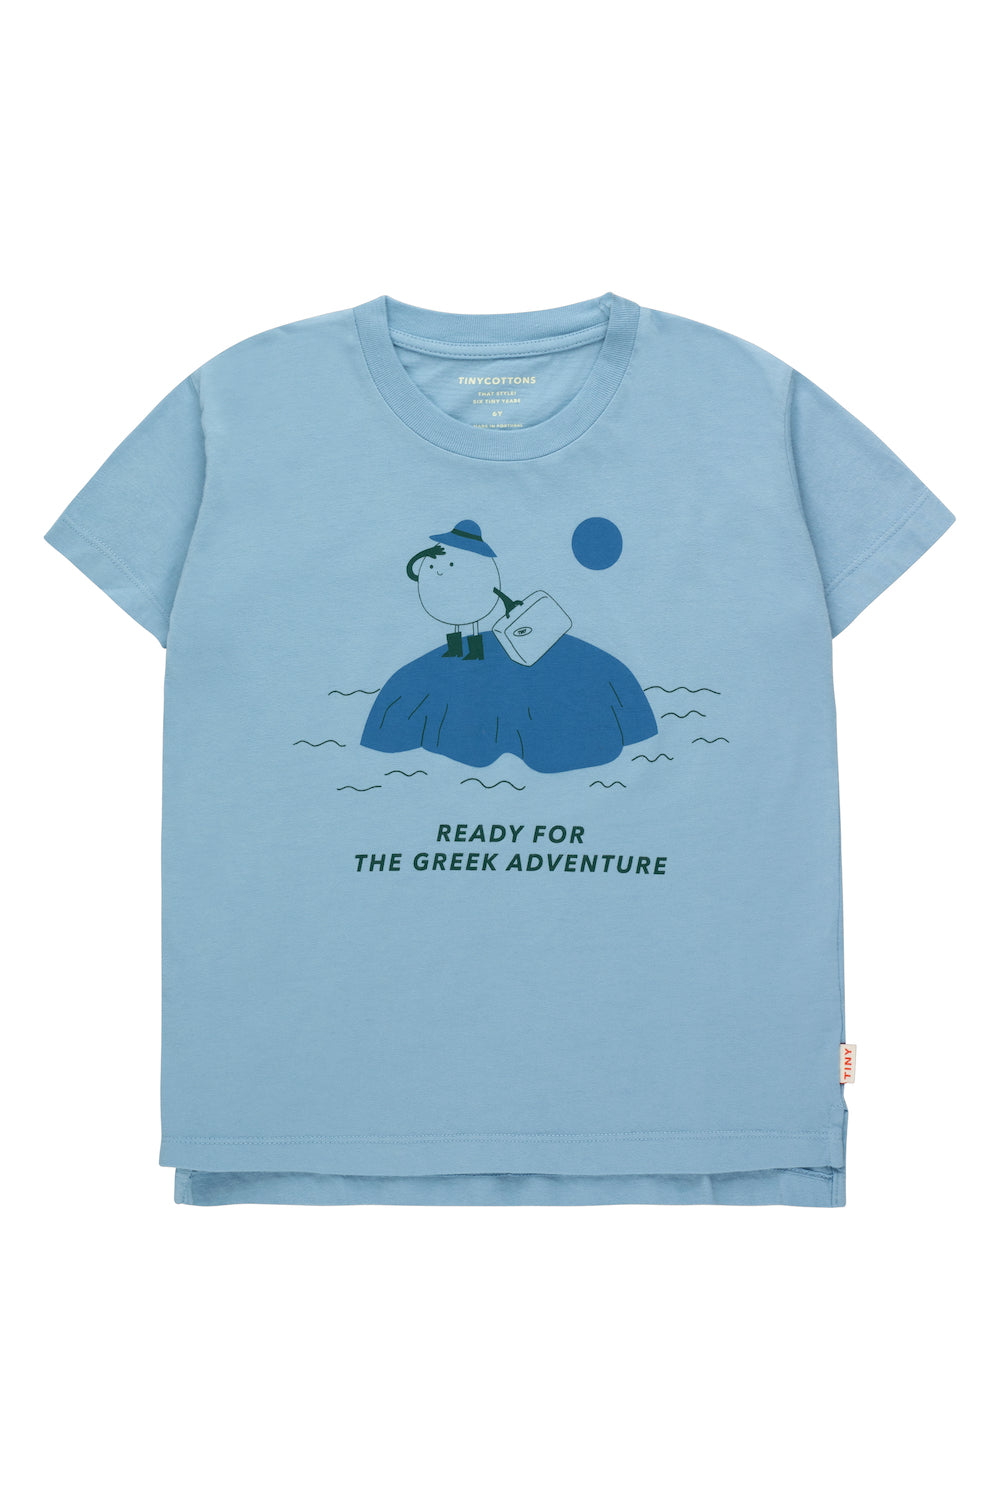 Tiny Cottons A Greek Adventure Tee - Washed Blue/Night Blue